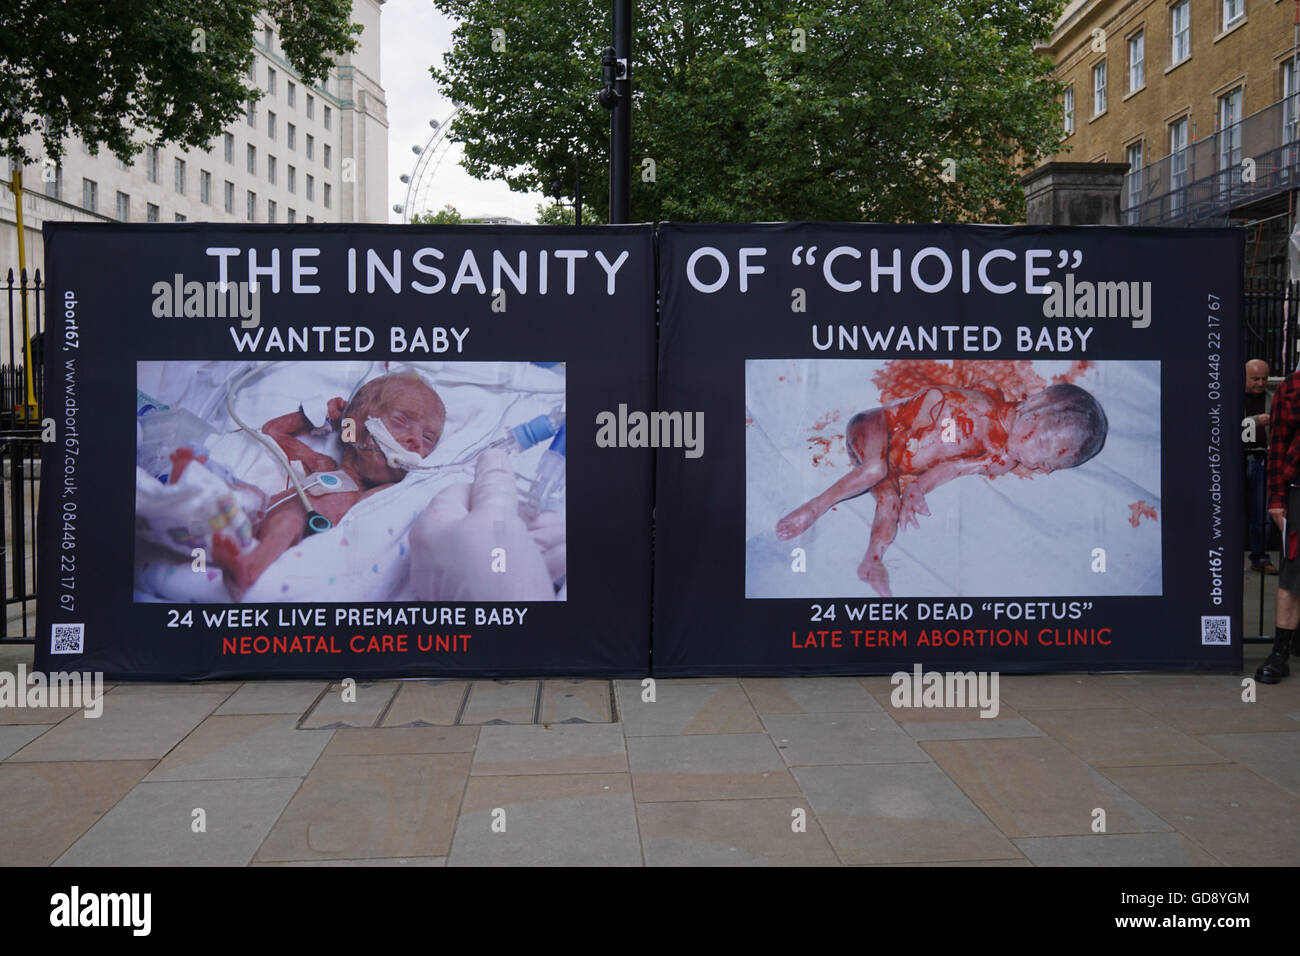 London, UK. 13th July, 2016. abort67 holds a demonatration against abortion, The Insanity of 'Choice' and gives adwareness to people a foetus is a living human baby and has the right to lives outside downing street, London, UK. Credit:  See Li/Alamy Live News Stock Photo